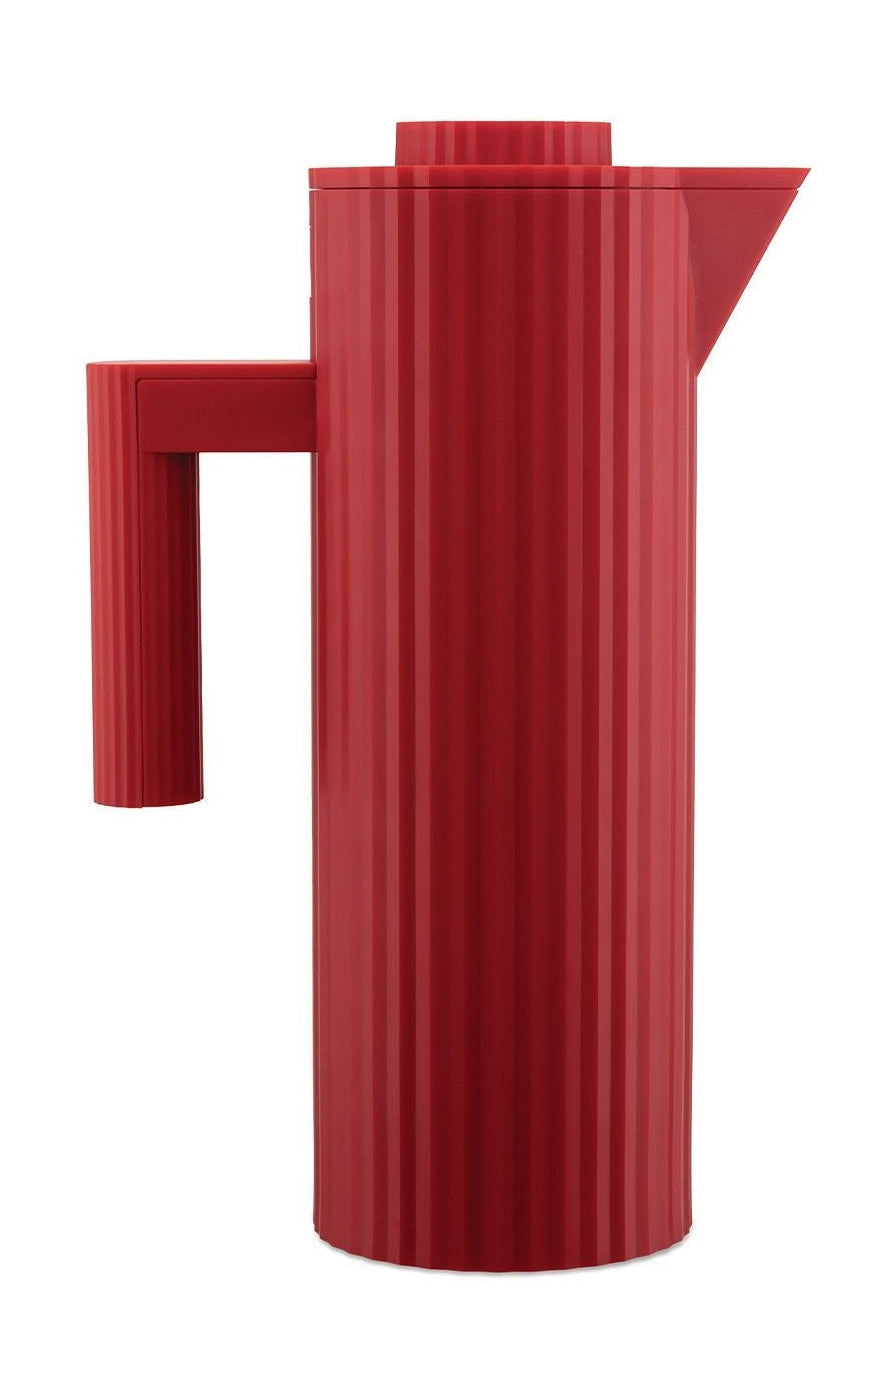 Alessi Plissé Thermo isolierter Krug 1 l, rot